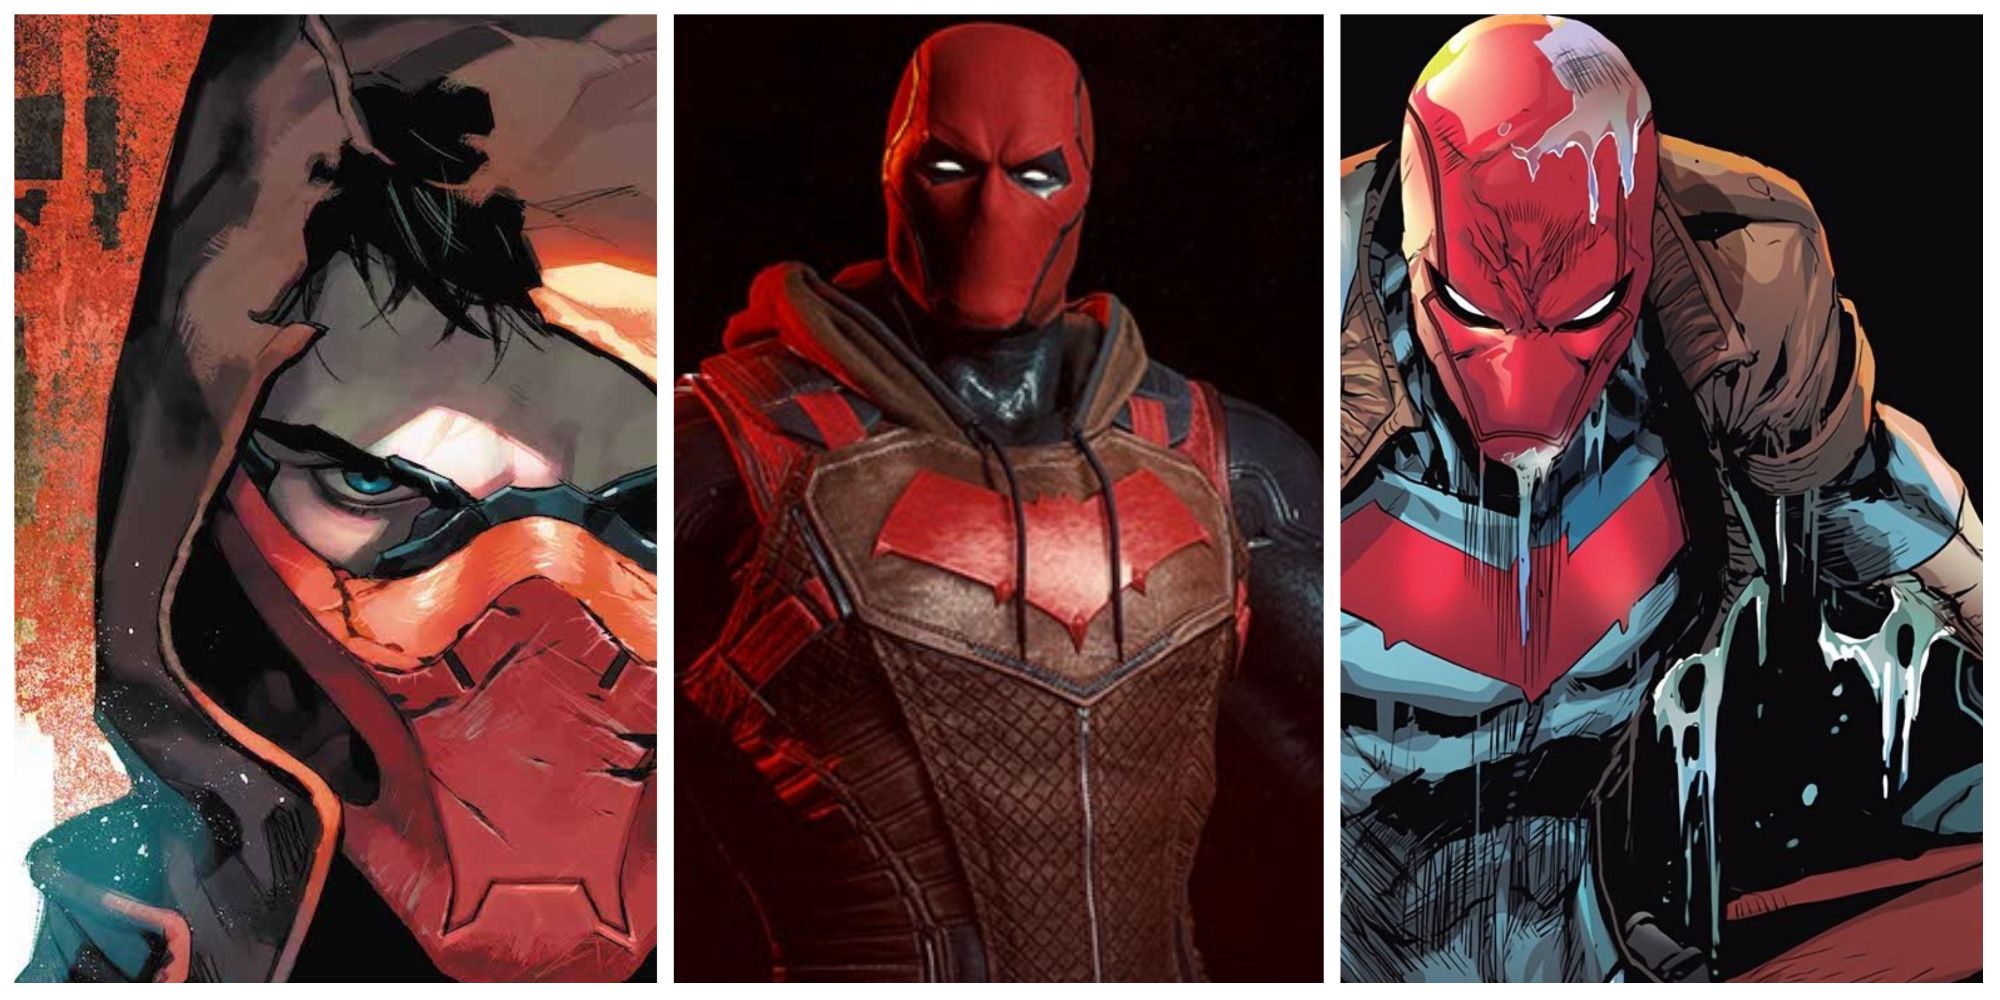 red hood in comics and red hood in gotham knights